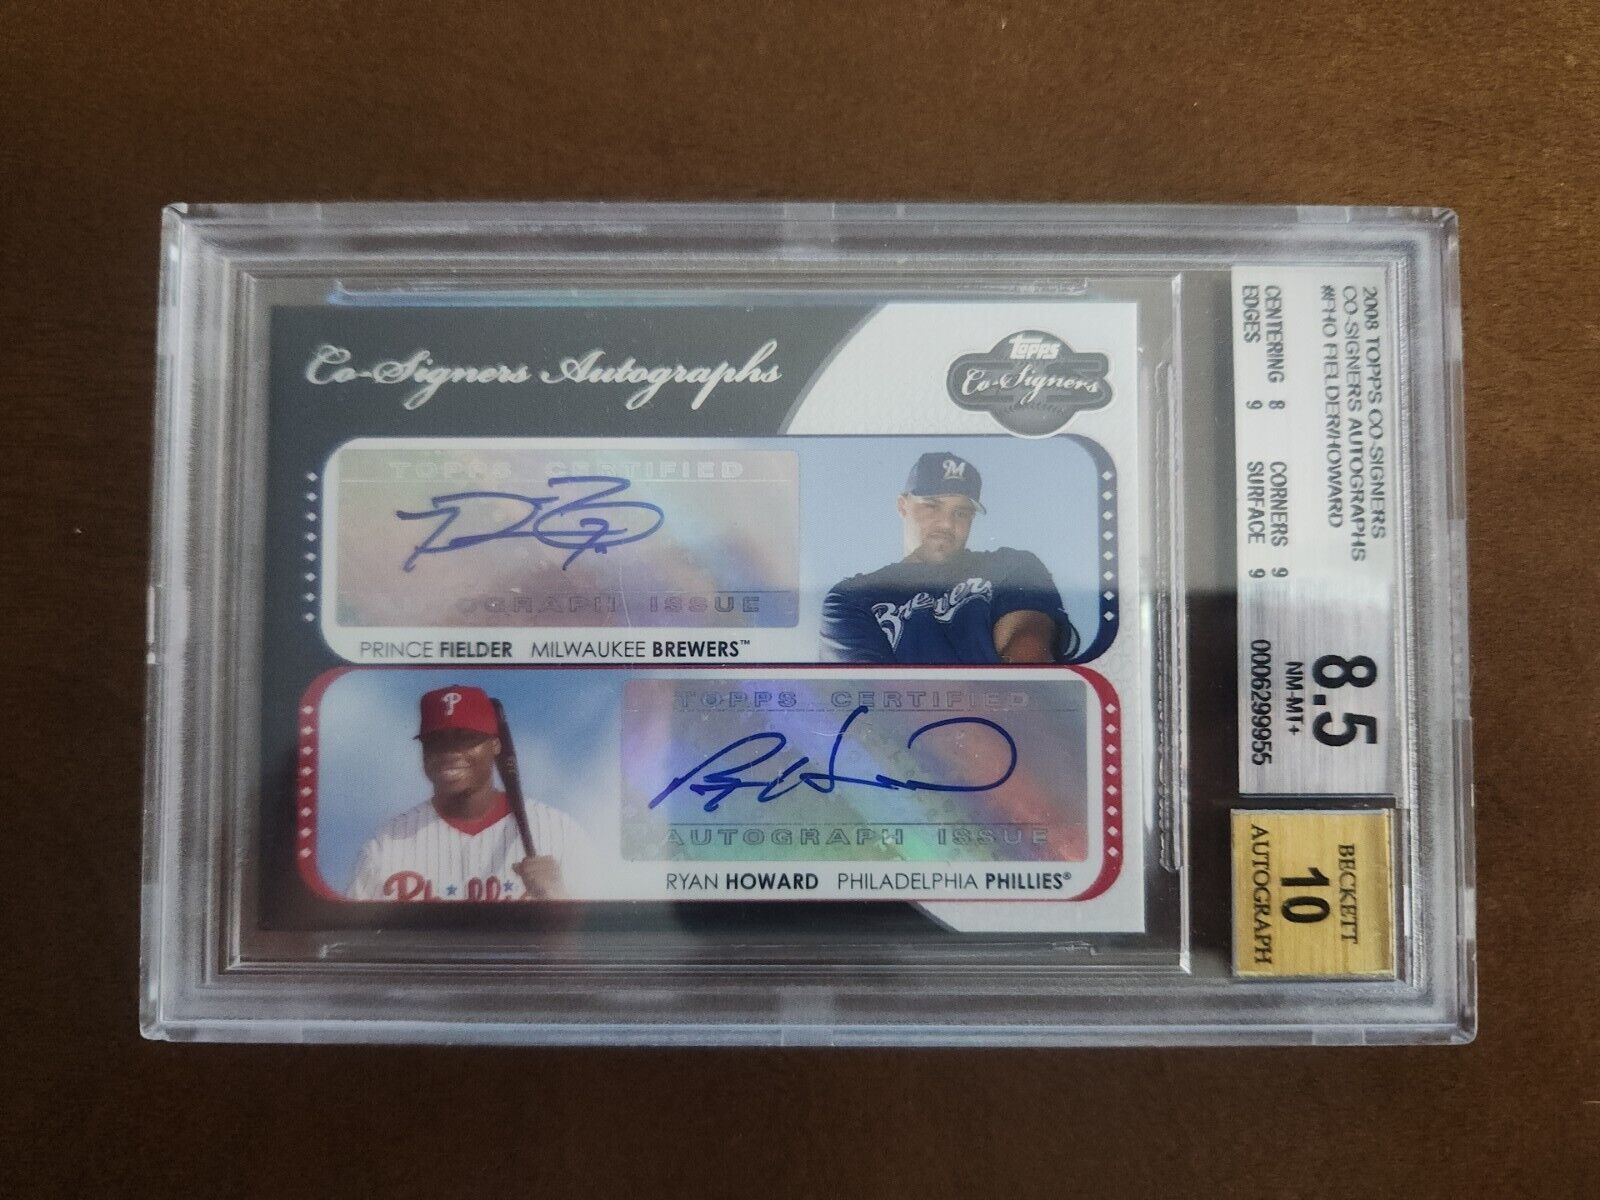 2008 Topps Co - Signers AUTOGRAPHS Ryan Howard & Prince Fielder DUAL BGS GRADED